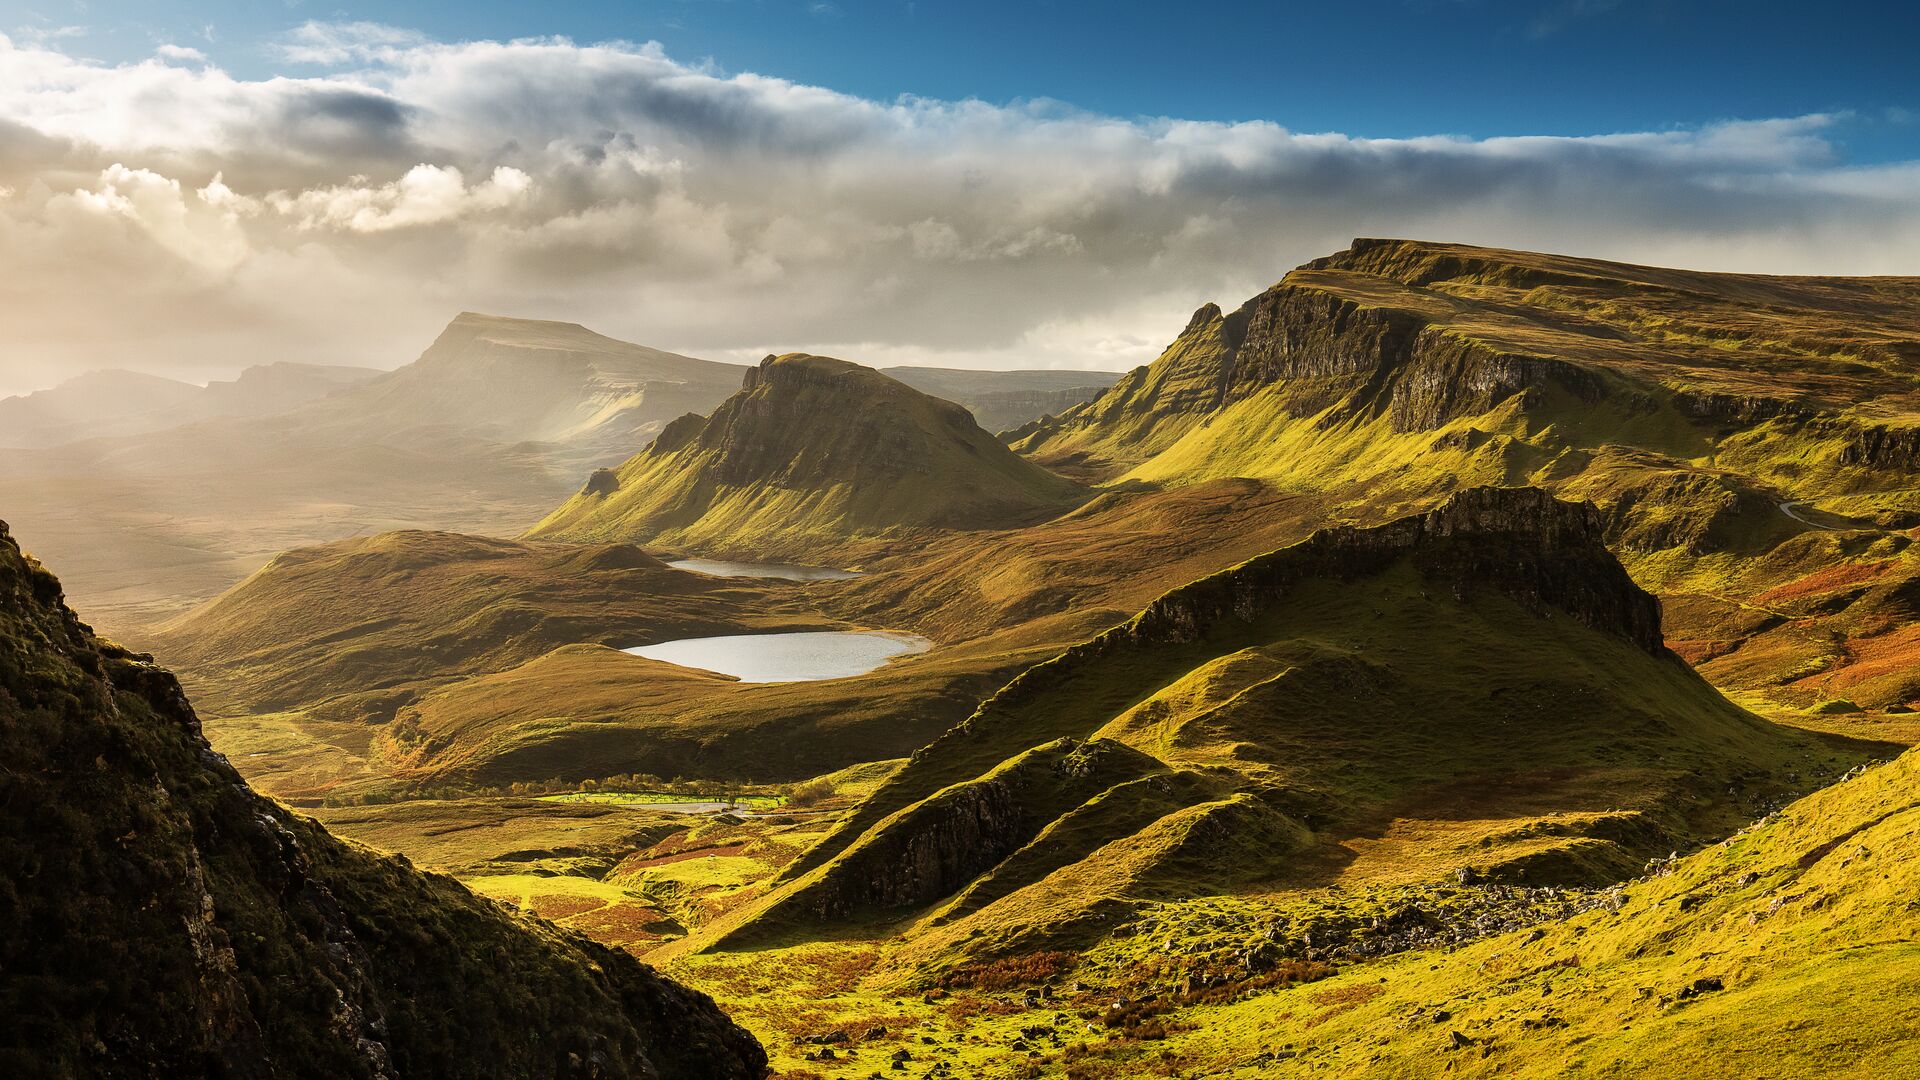 Green mountains and valleys in Scotland shine in the sun with mist in the background and a bright blue sky